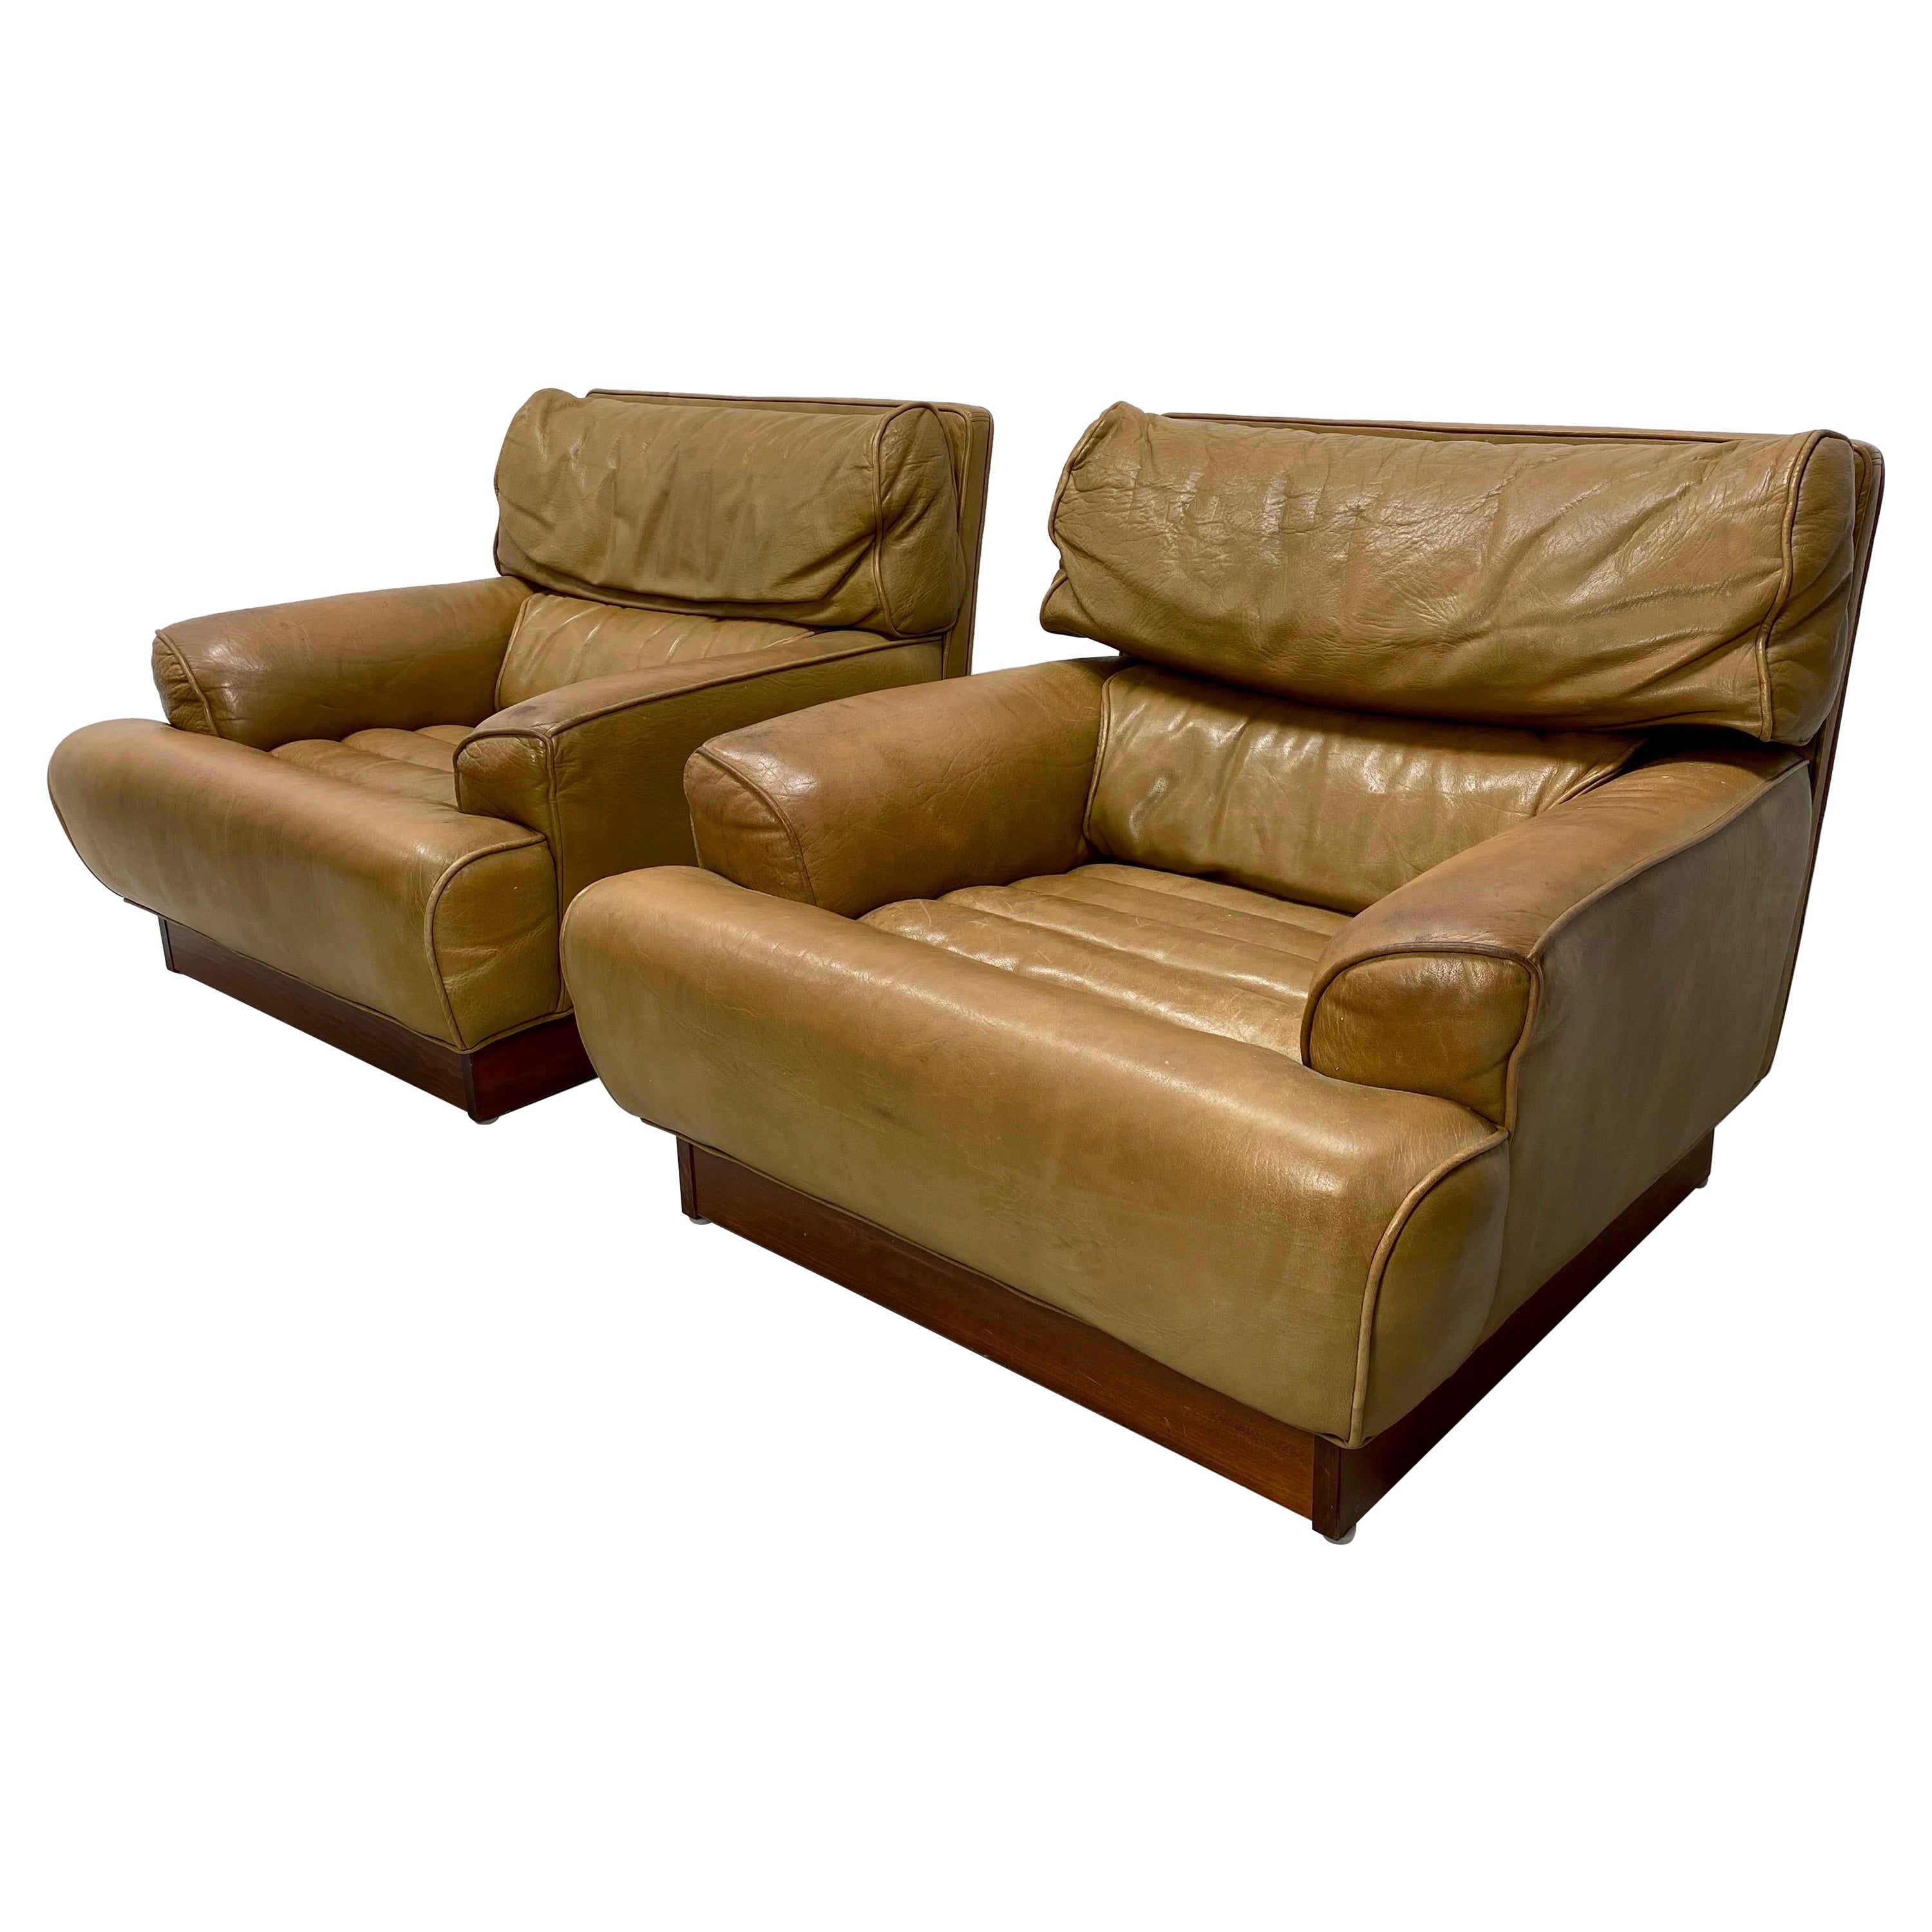 Pair of 1970s Arne Norell Leather Lounge Chairs For Sale